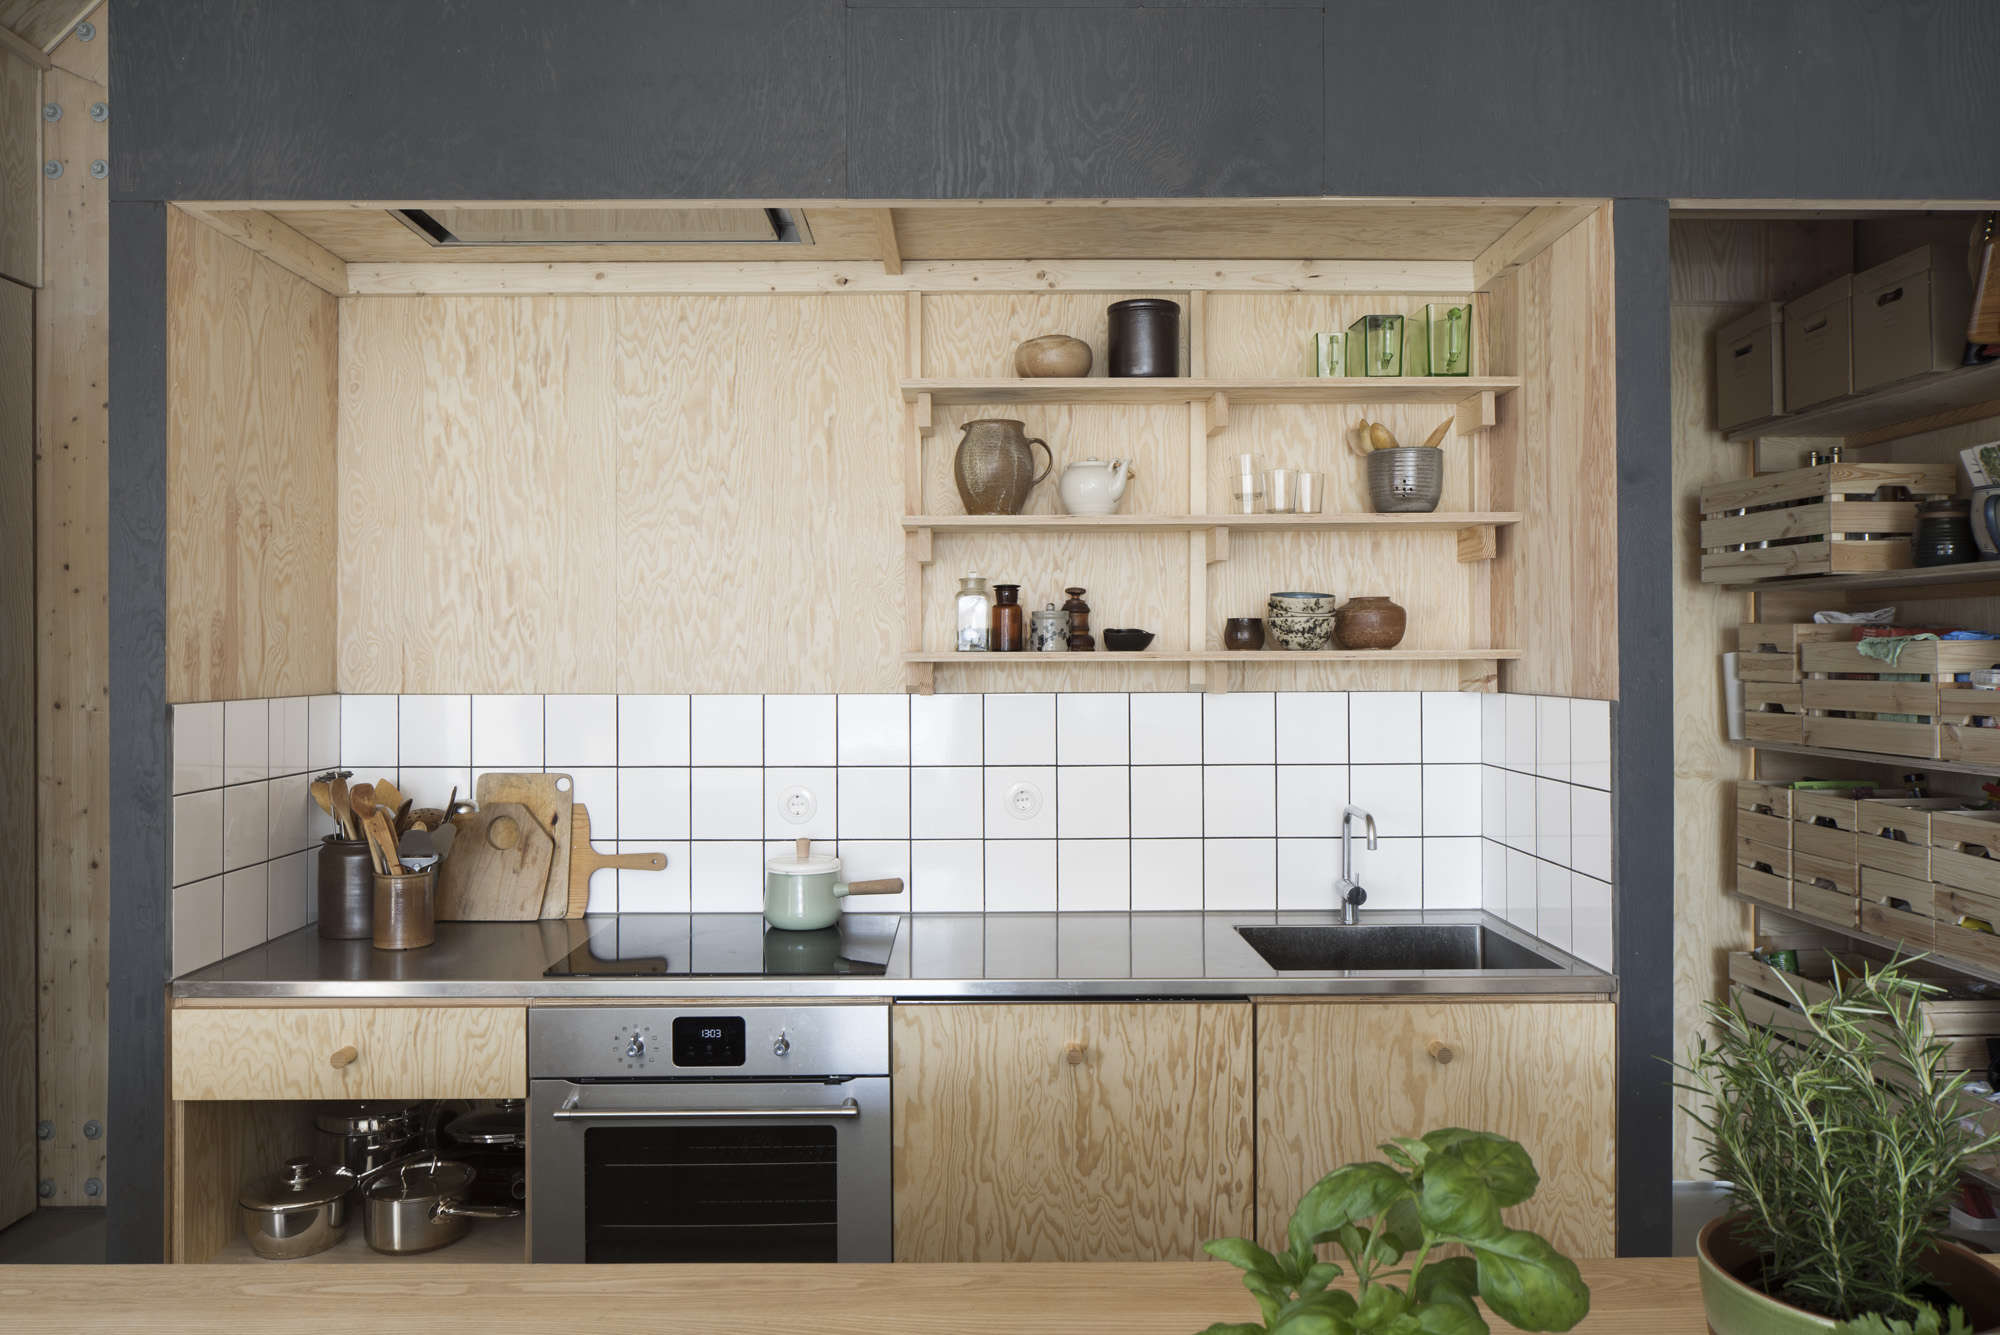 https://www.remodelista.com/wp-content/uploads/2017/01/House-for-Mother-plywood-kitchen-crate-storage-Forstberg-Ling-3.jpg